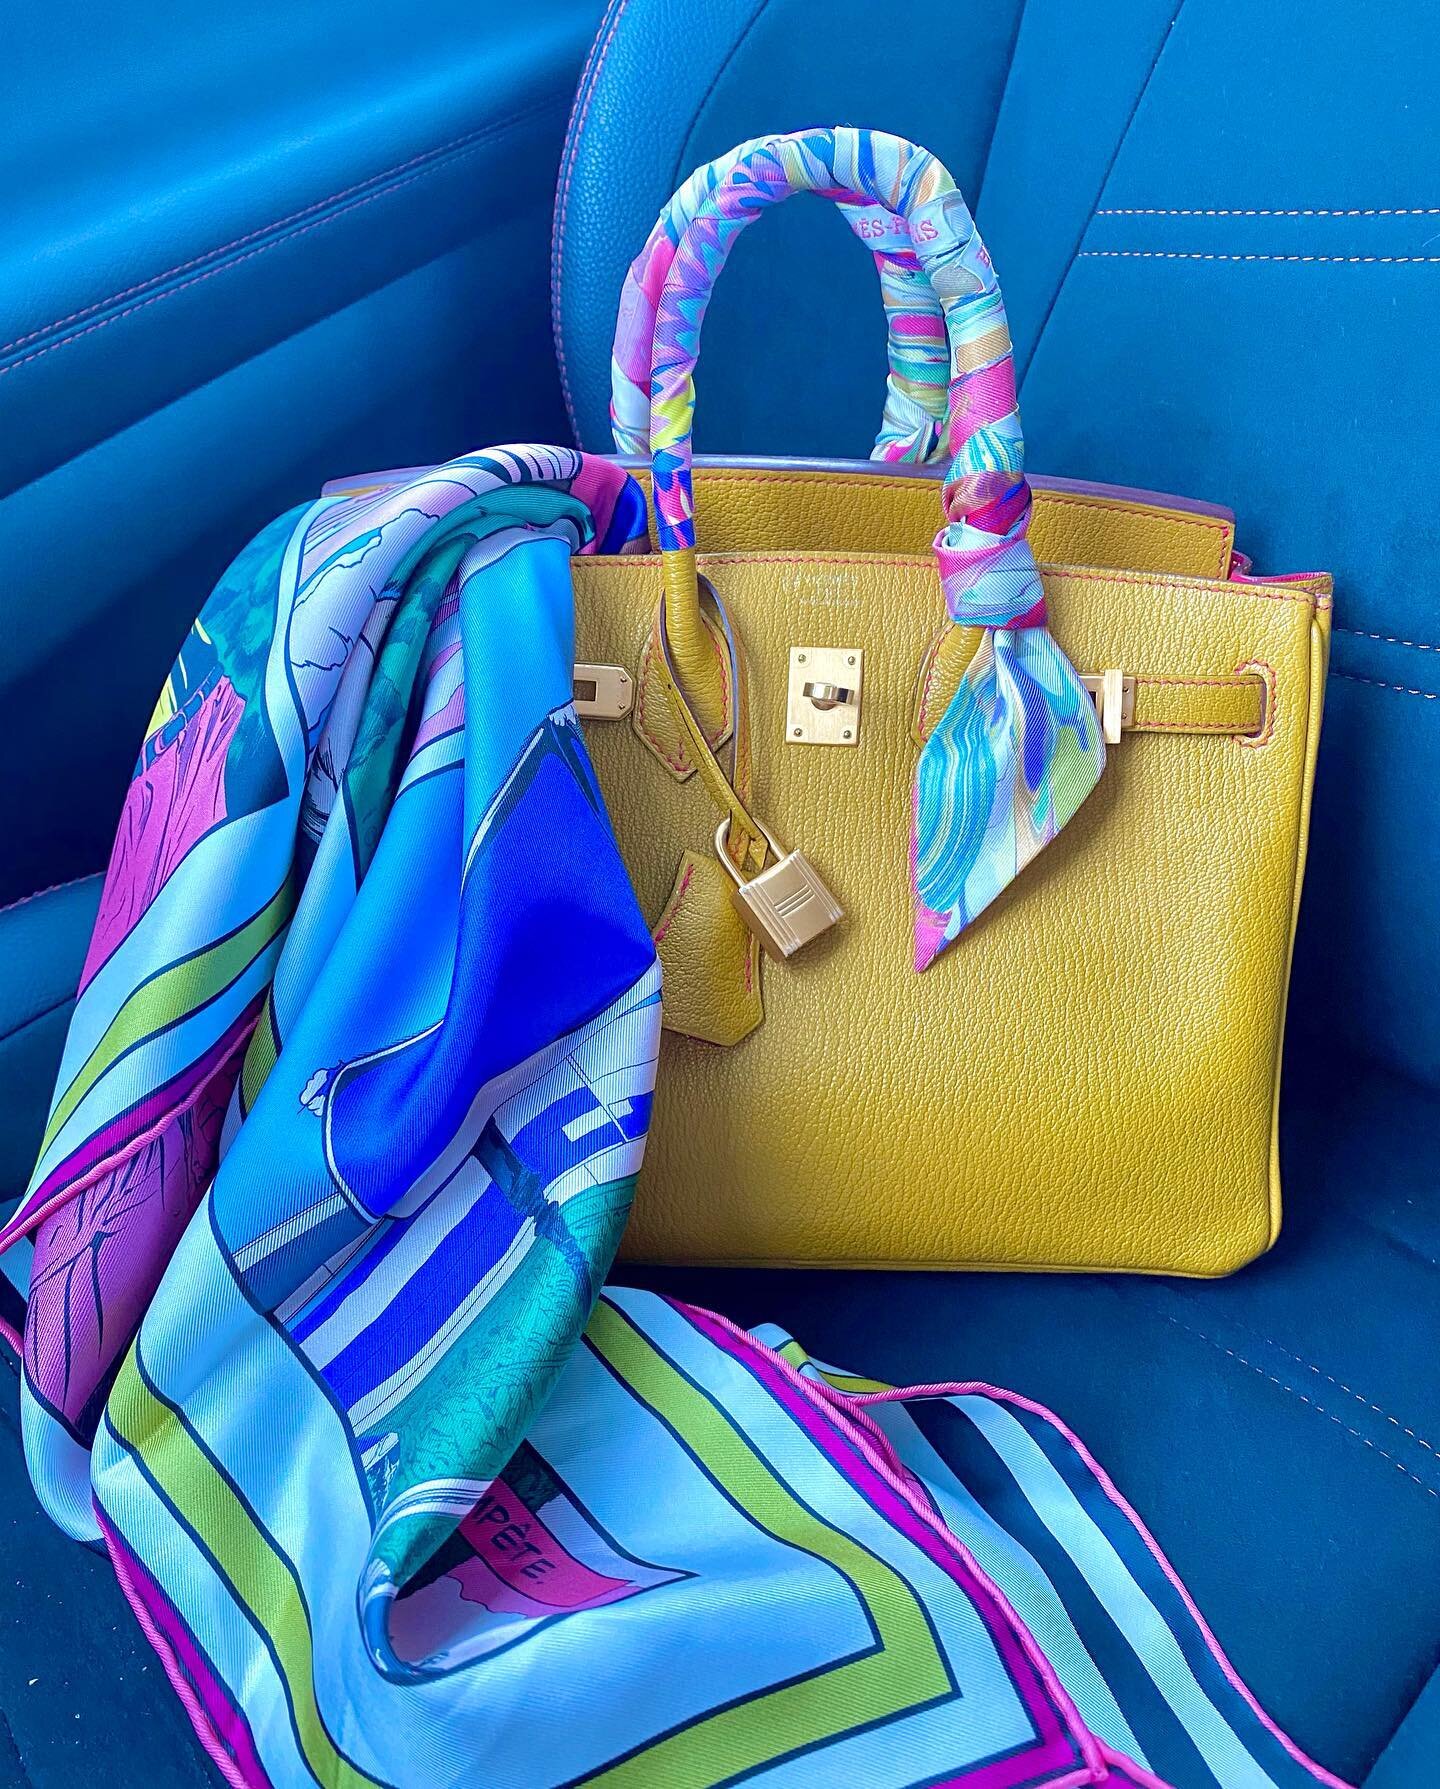 One thing I enjoy about collecting is when completely different pieces come together for a perfect match. My sunny Jaune Ambre SO Birkin goes perfectly with these super special marbled Twillies (@hermes posted an amazing video about the unique marbli